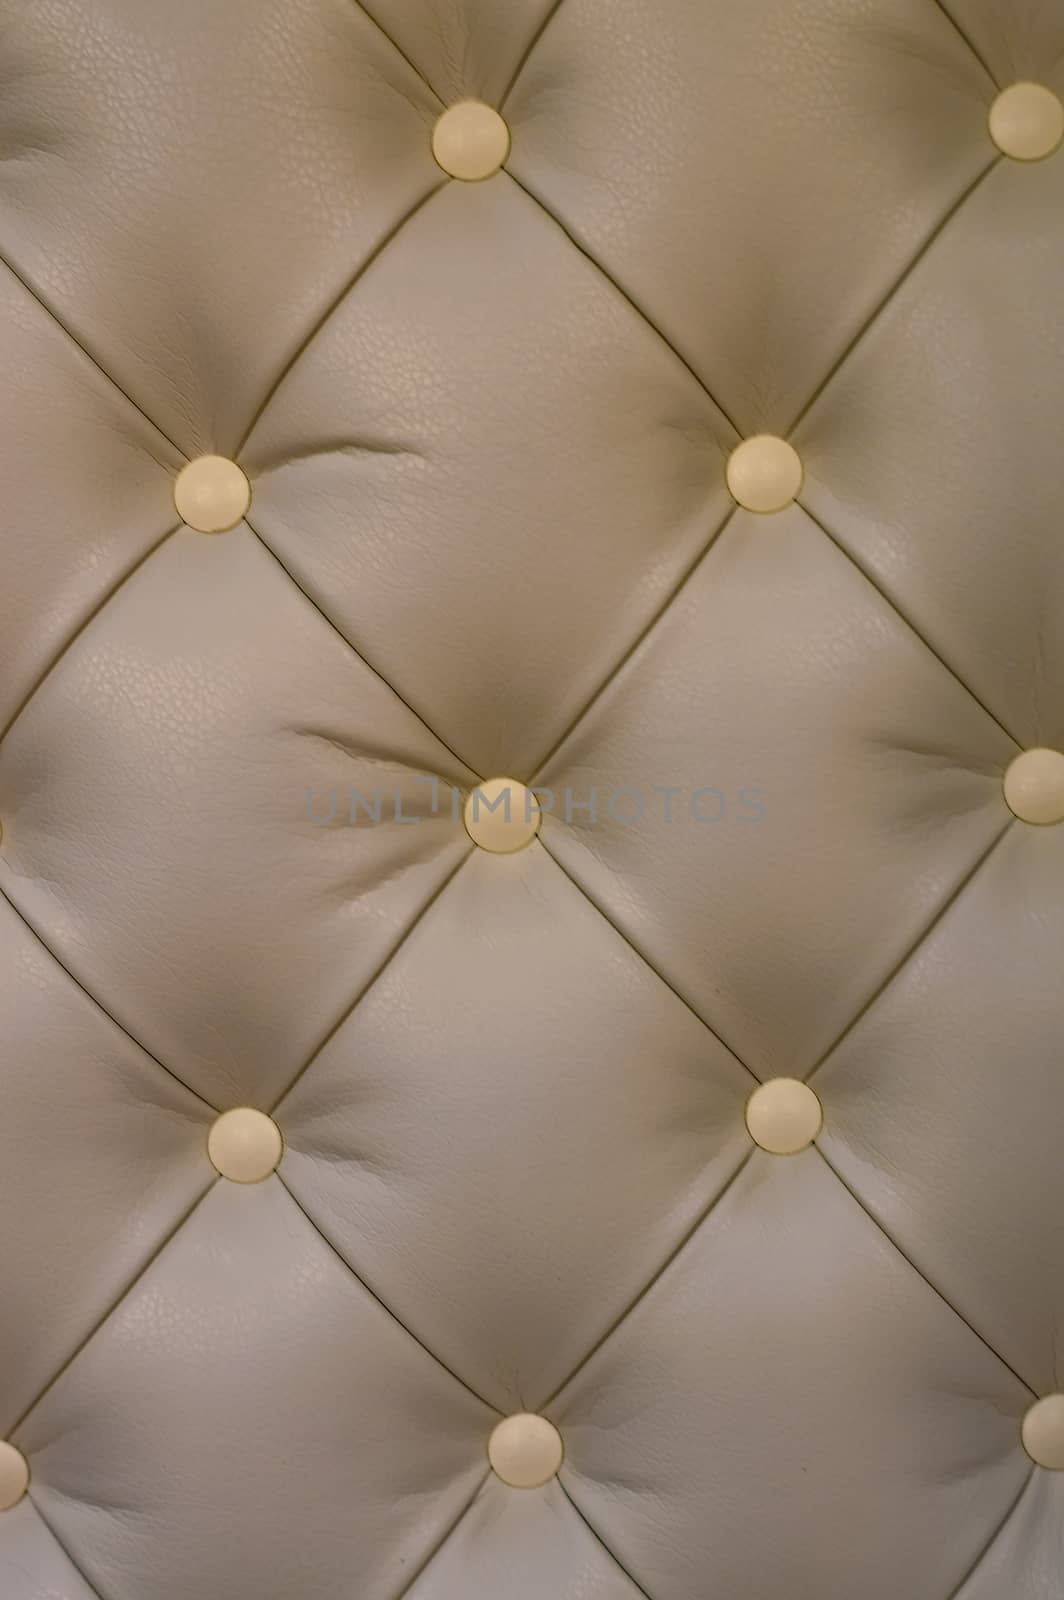 Textural rhomb ornament on dark upholstery. Front view. Close up.